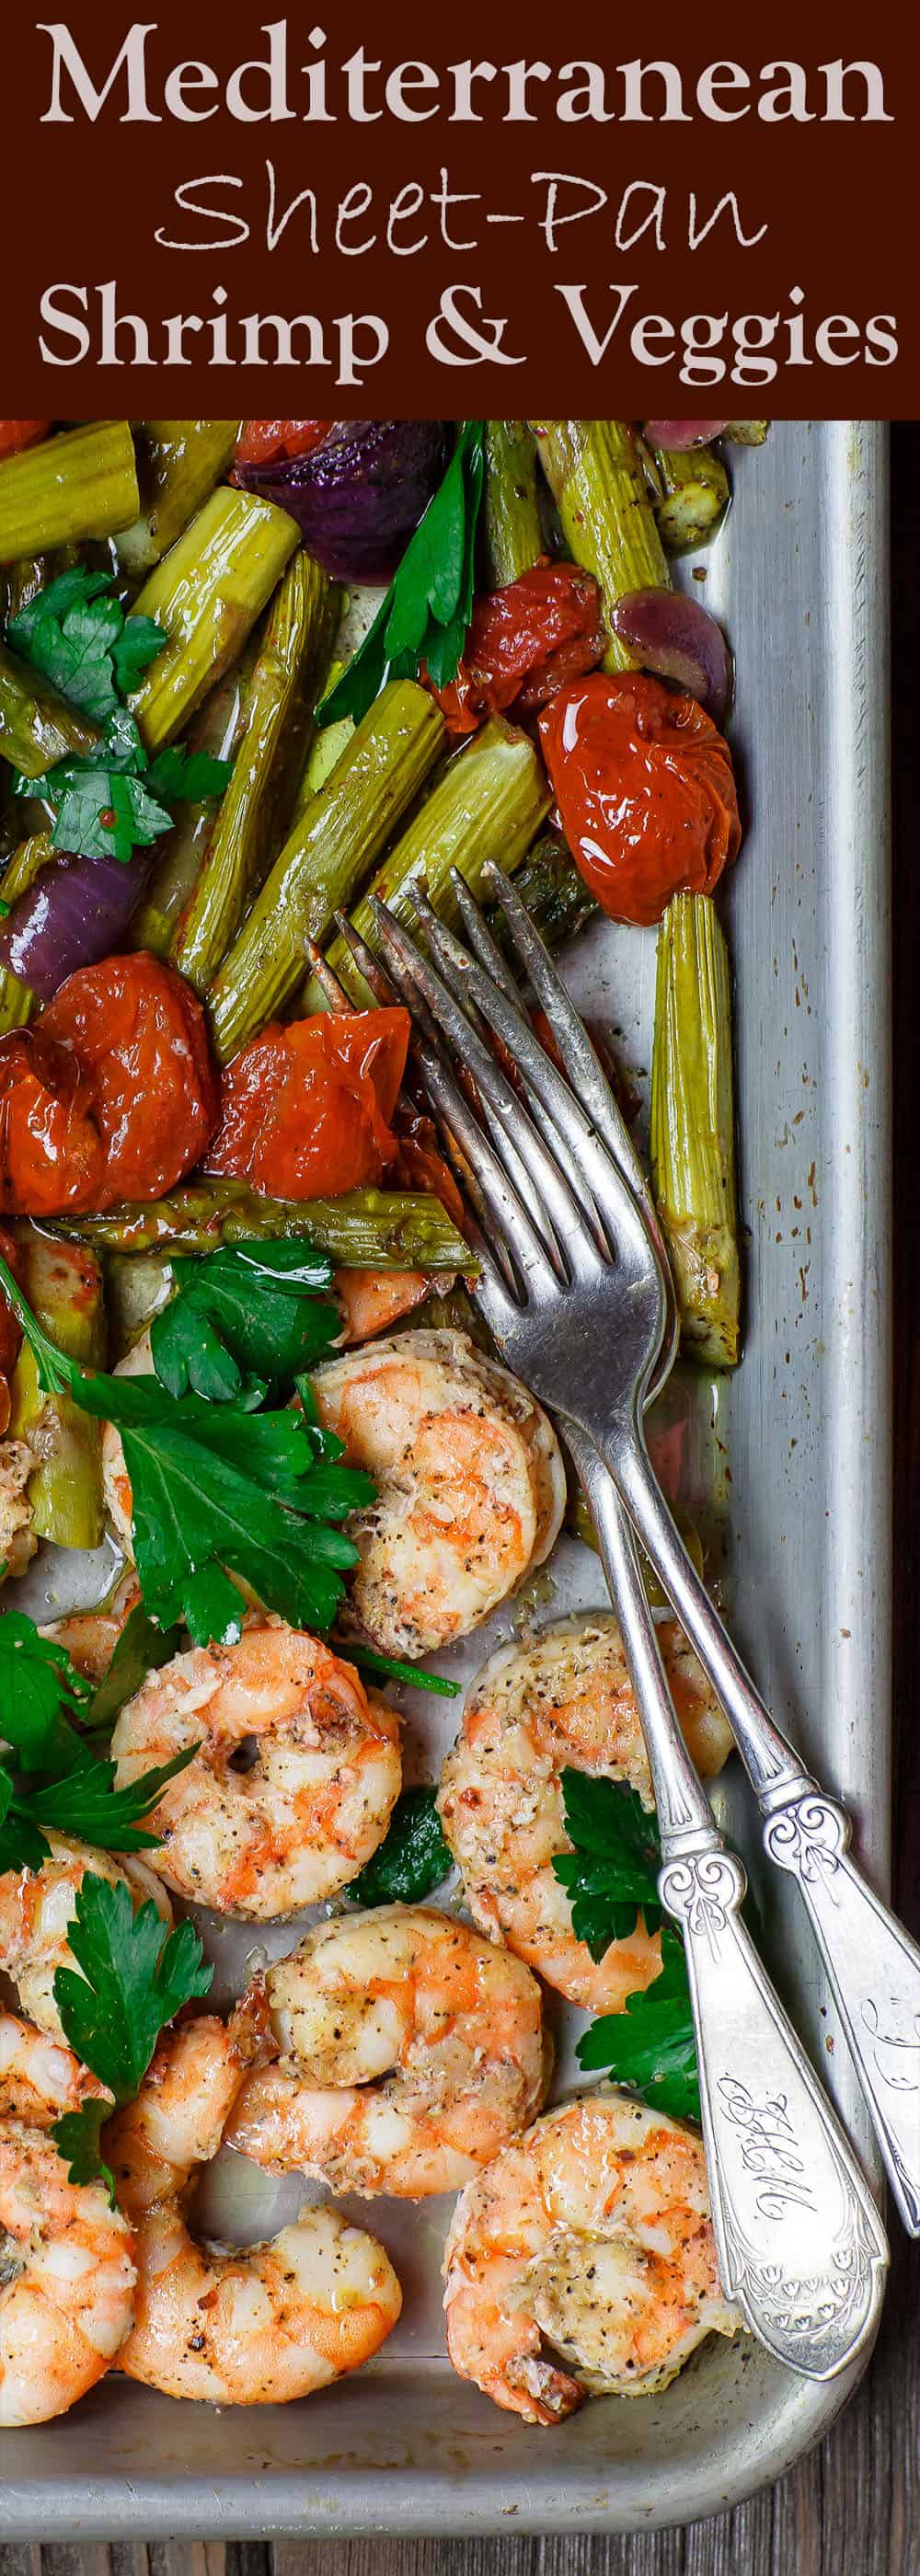 Mediterranean Sheet Pan Shrimp and Veggies | The Mediterranean Dish. Easy, quick baked shrimp with veggies, all dressed in a Mediterranean citrus-ginger sauce. Ready in 25 minutes! From TheMediterraneanDish.com #shrimp #mediterranean #mediterraneandiet #easyrecipe #onepanmeal #sheetpandinner #seafood #healthyrecipes #whole30 #glutenfree